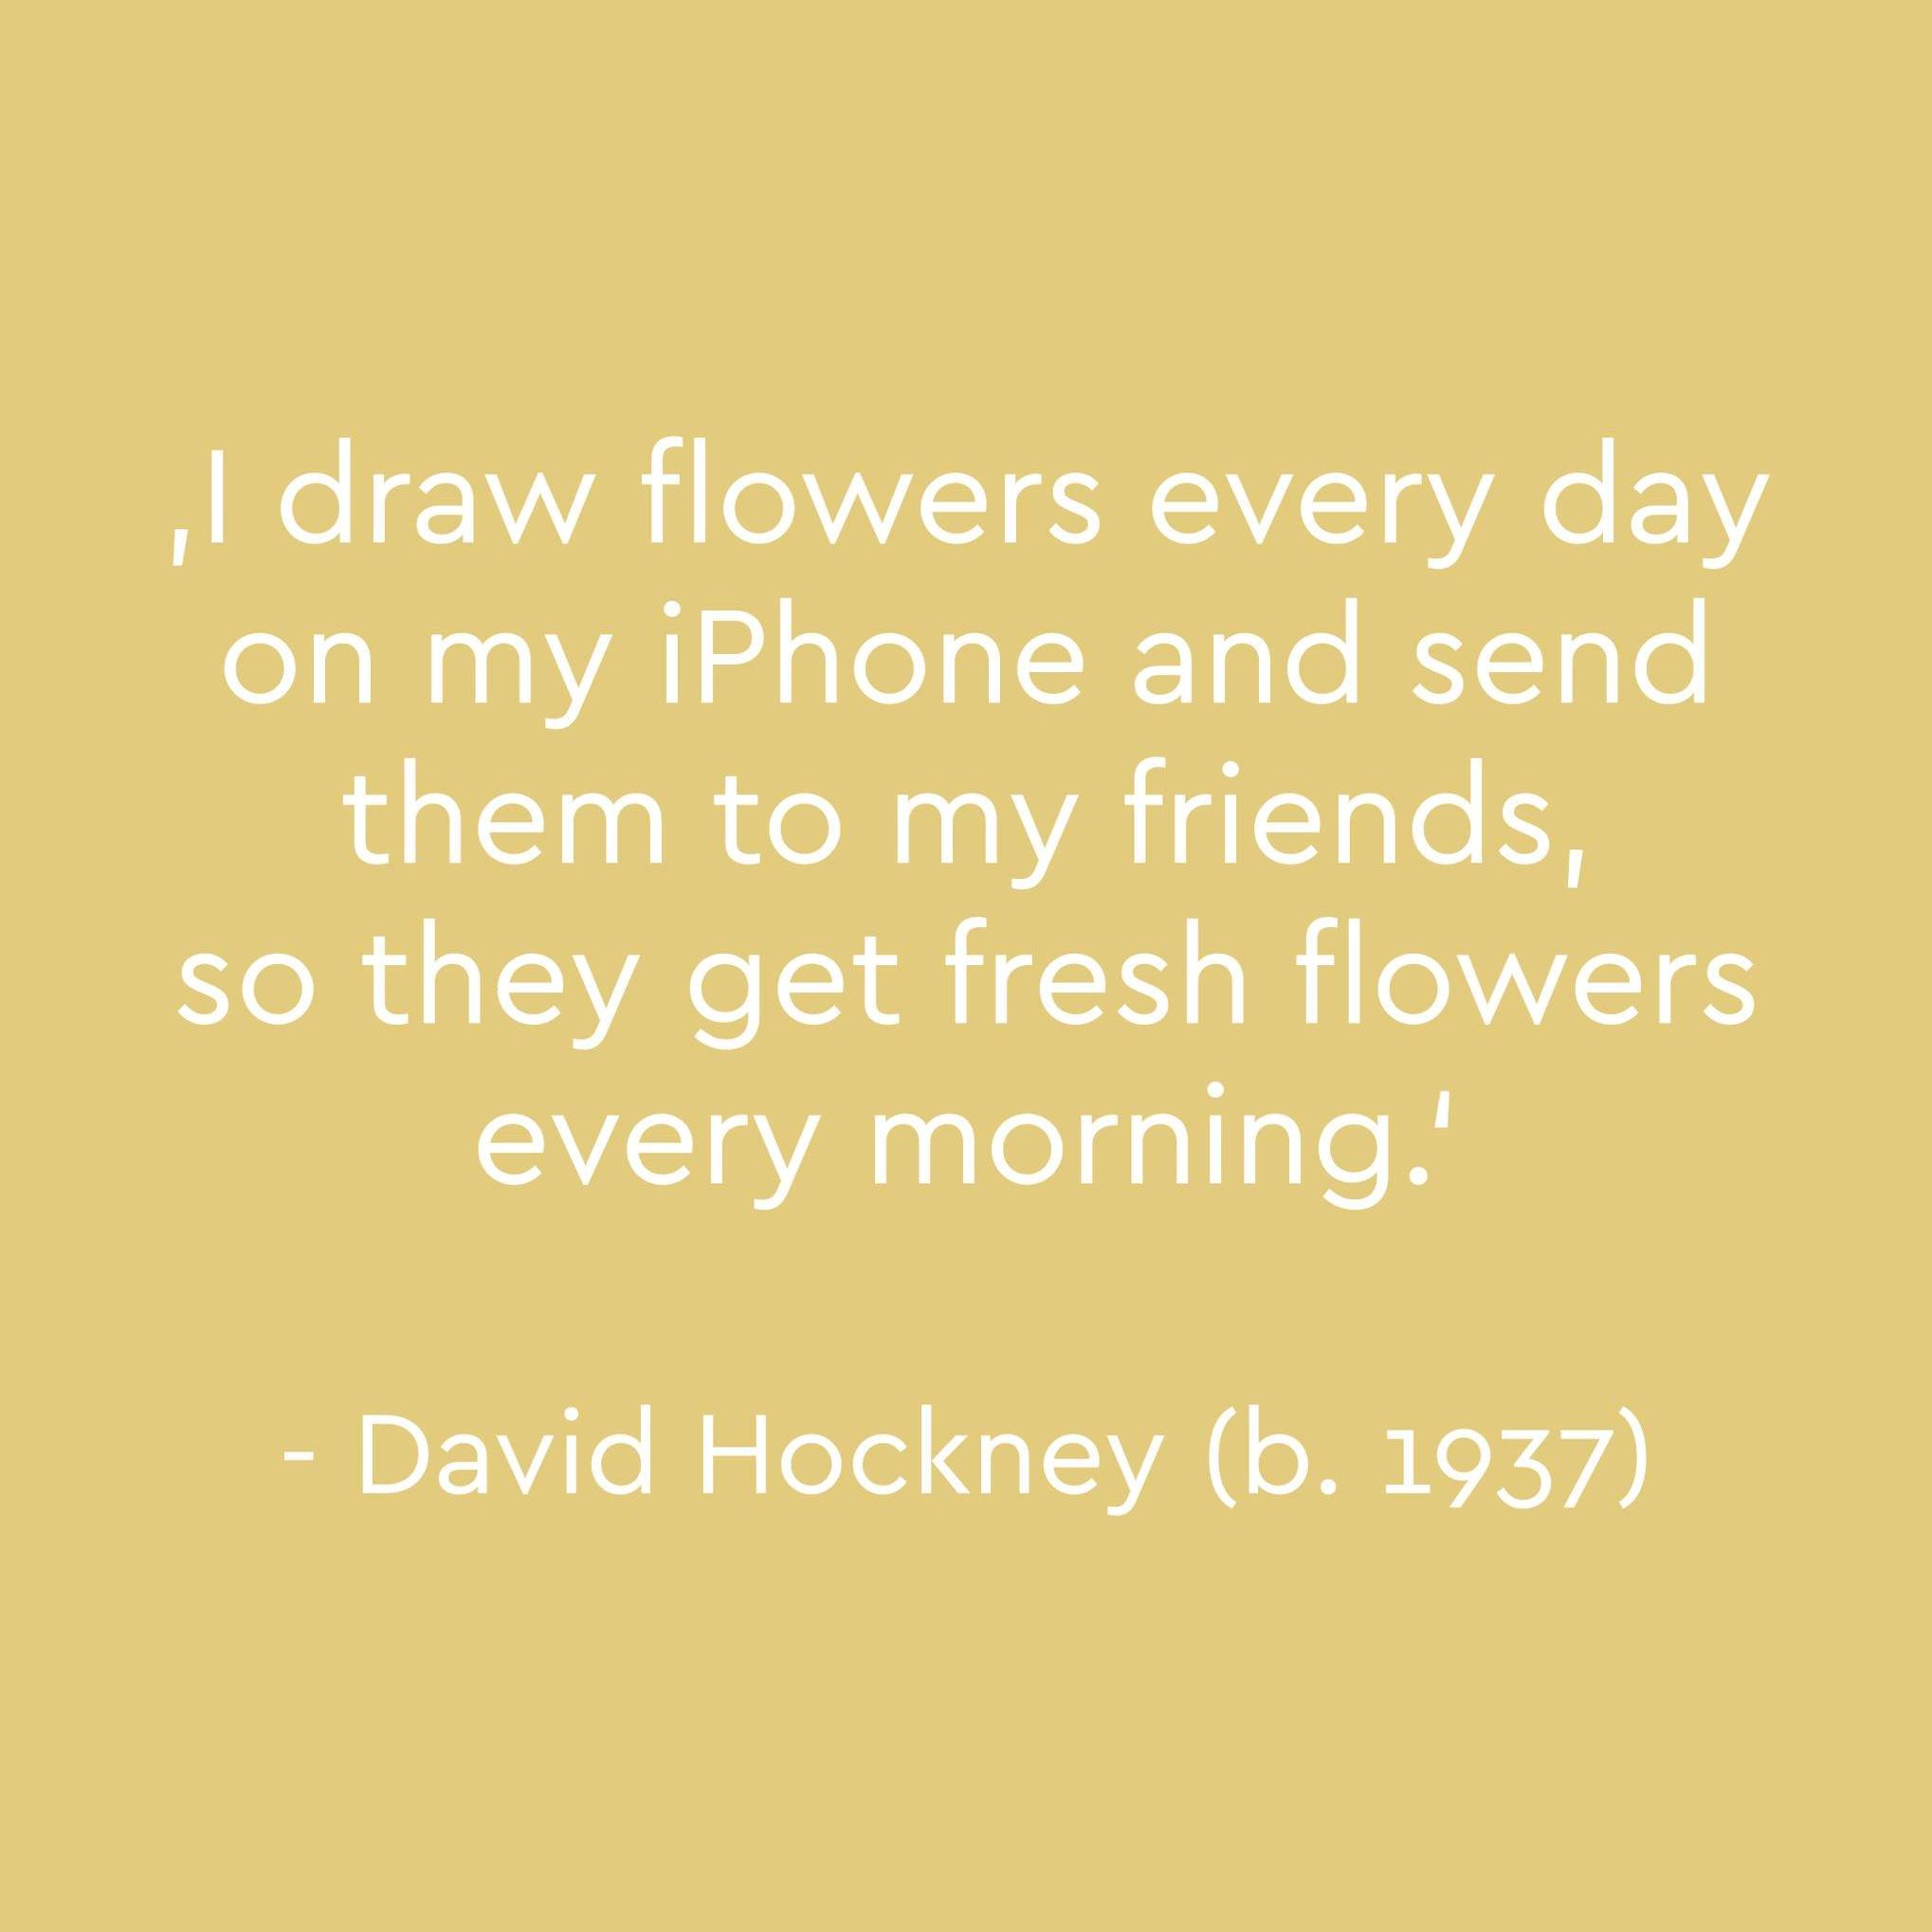 The small gestures are what matters most.

#davidhockney #bigsmallgesture #quoteofthemonth #springconcepts